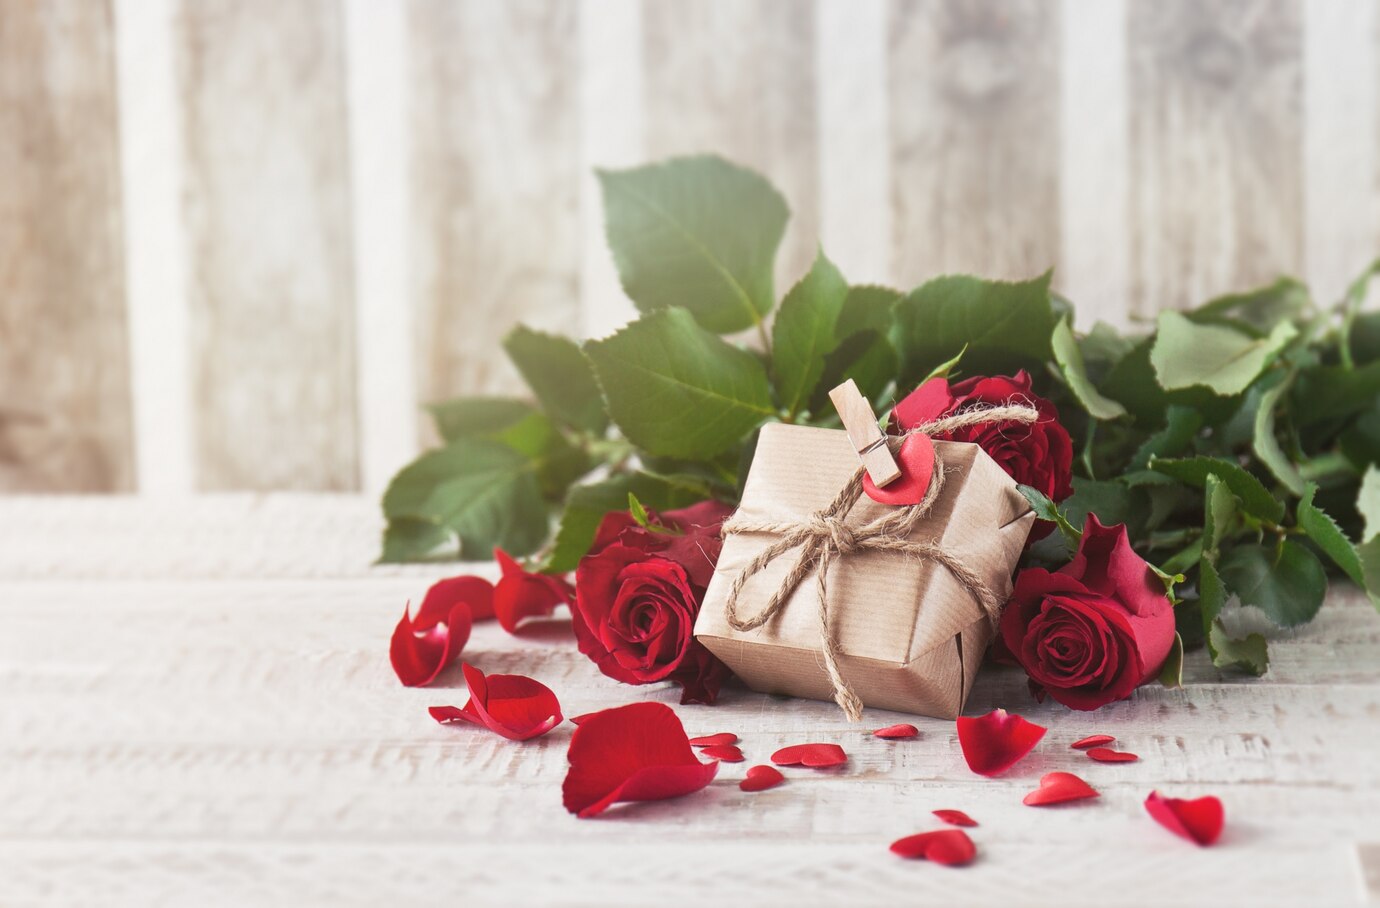 Show How He Is Worth To You Through Valentine's Day Gifts 